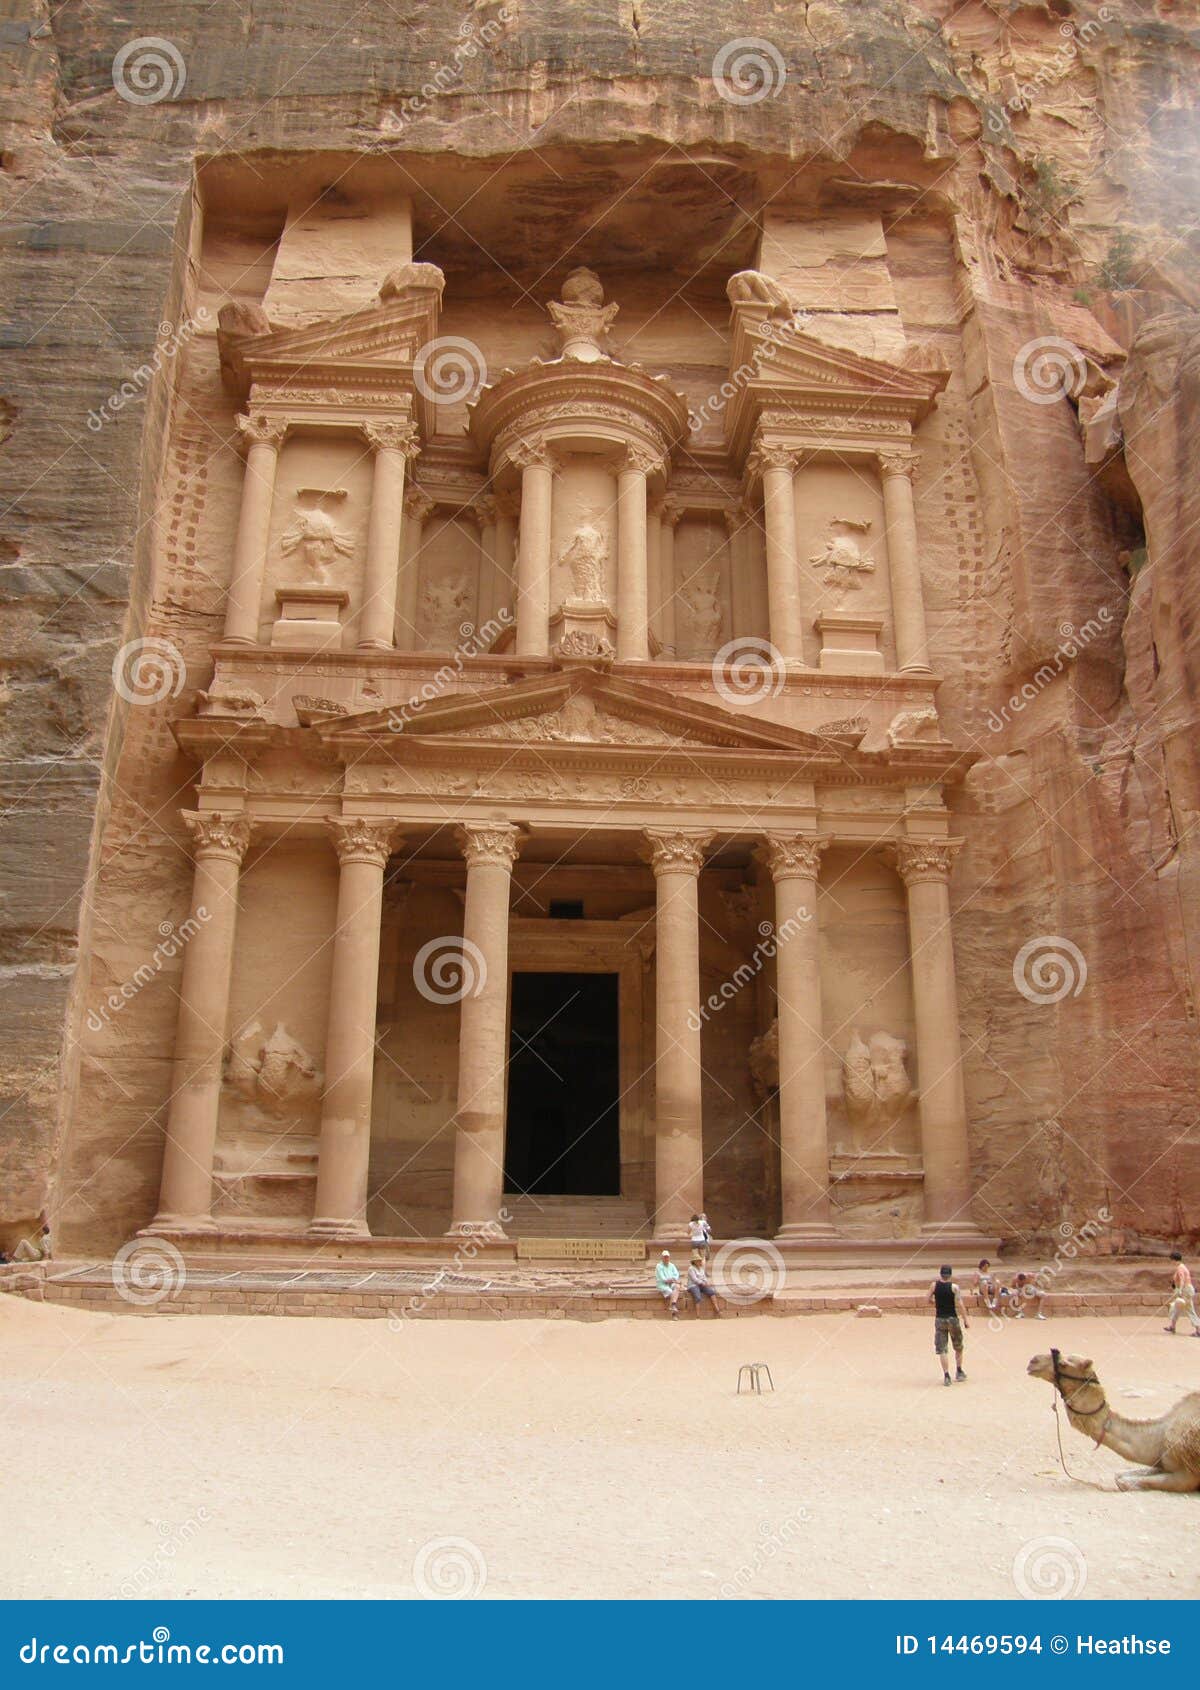 Petra, the Pink of Stock Photo - Image city, 14469594